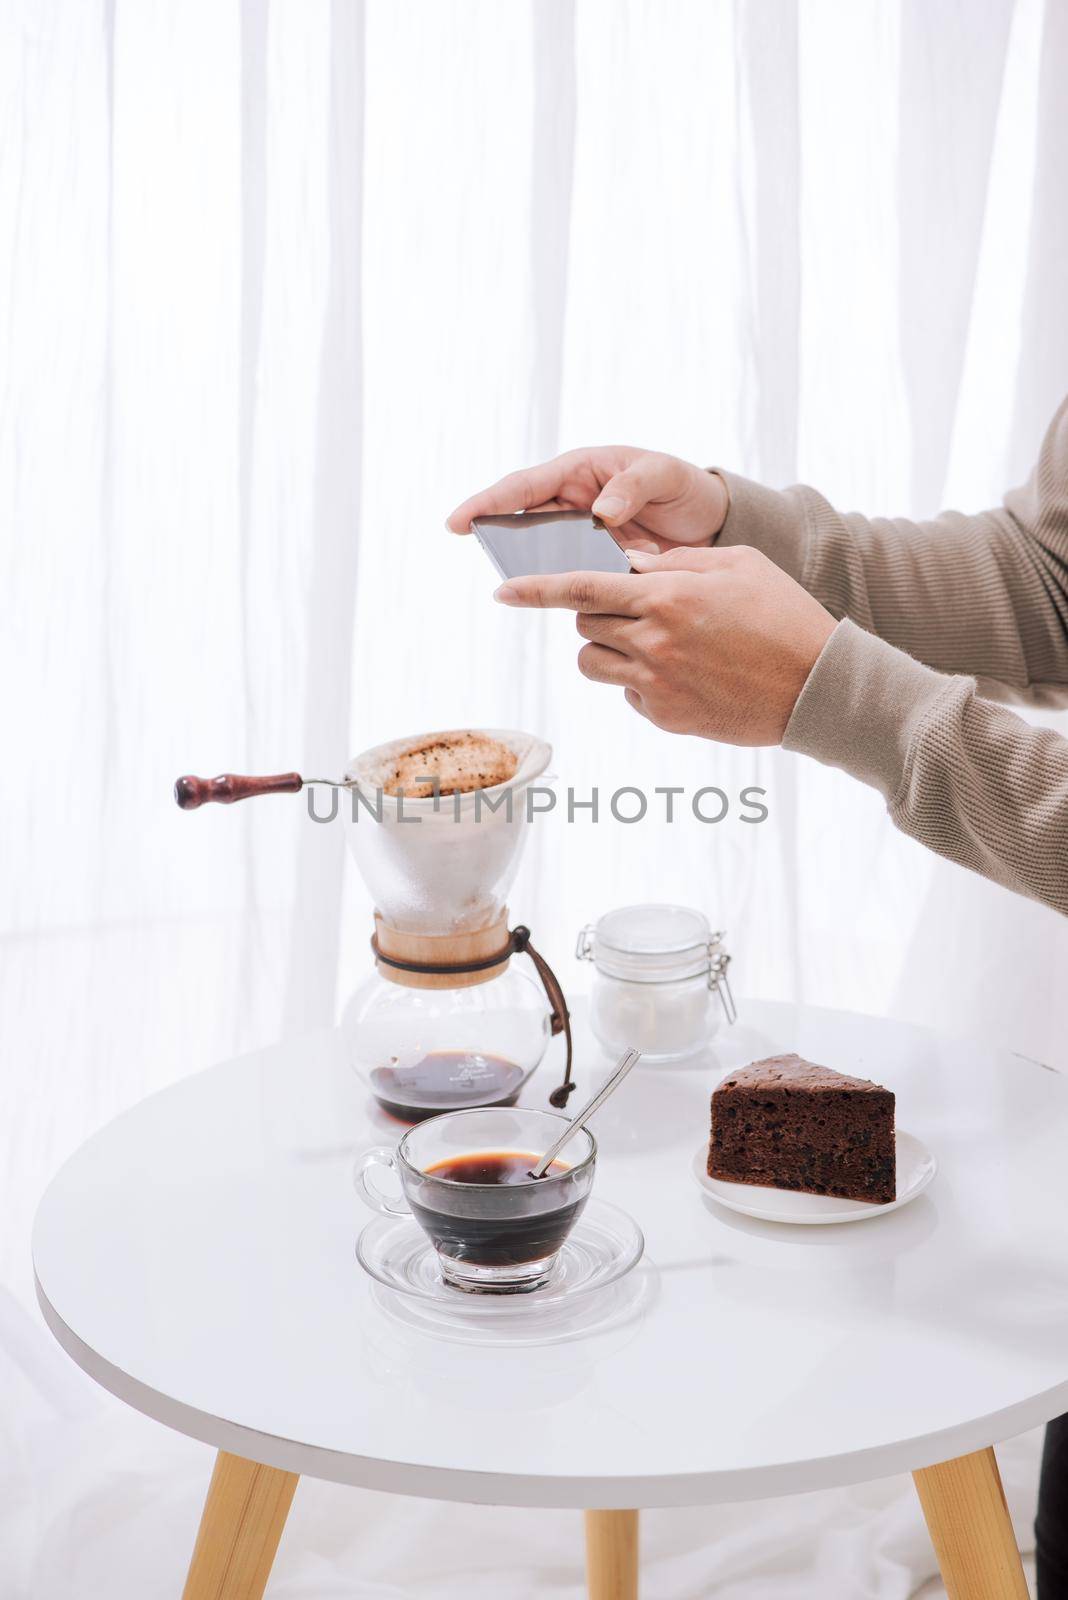 Handsome asian taking photo of chocolate cake and milk at coffee shop. Dessert or food photography hobby. Smartphone or mobile phone photography habit concept. 